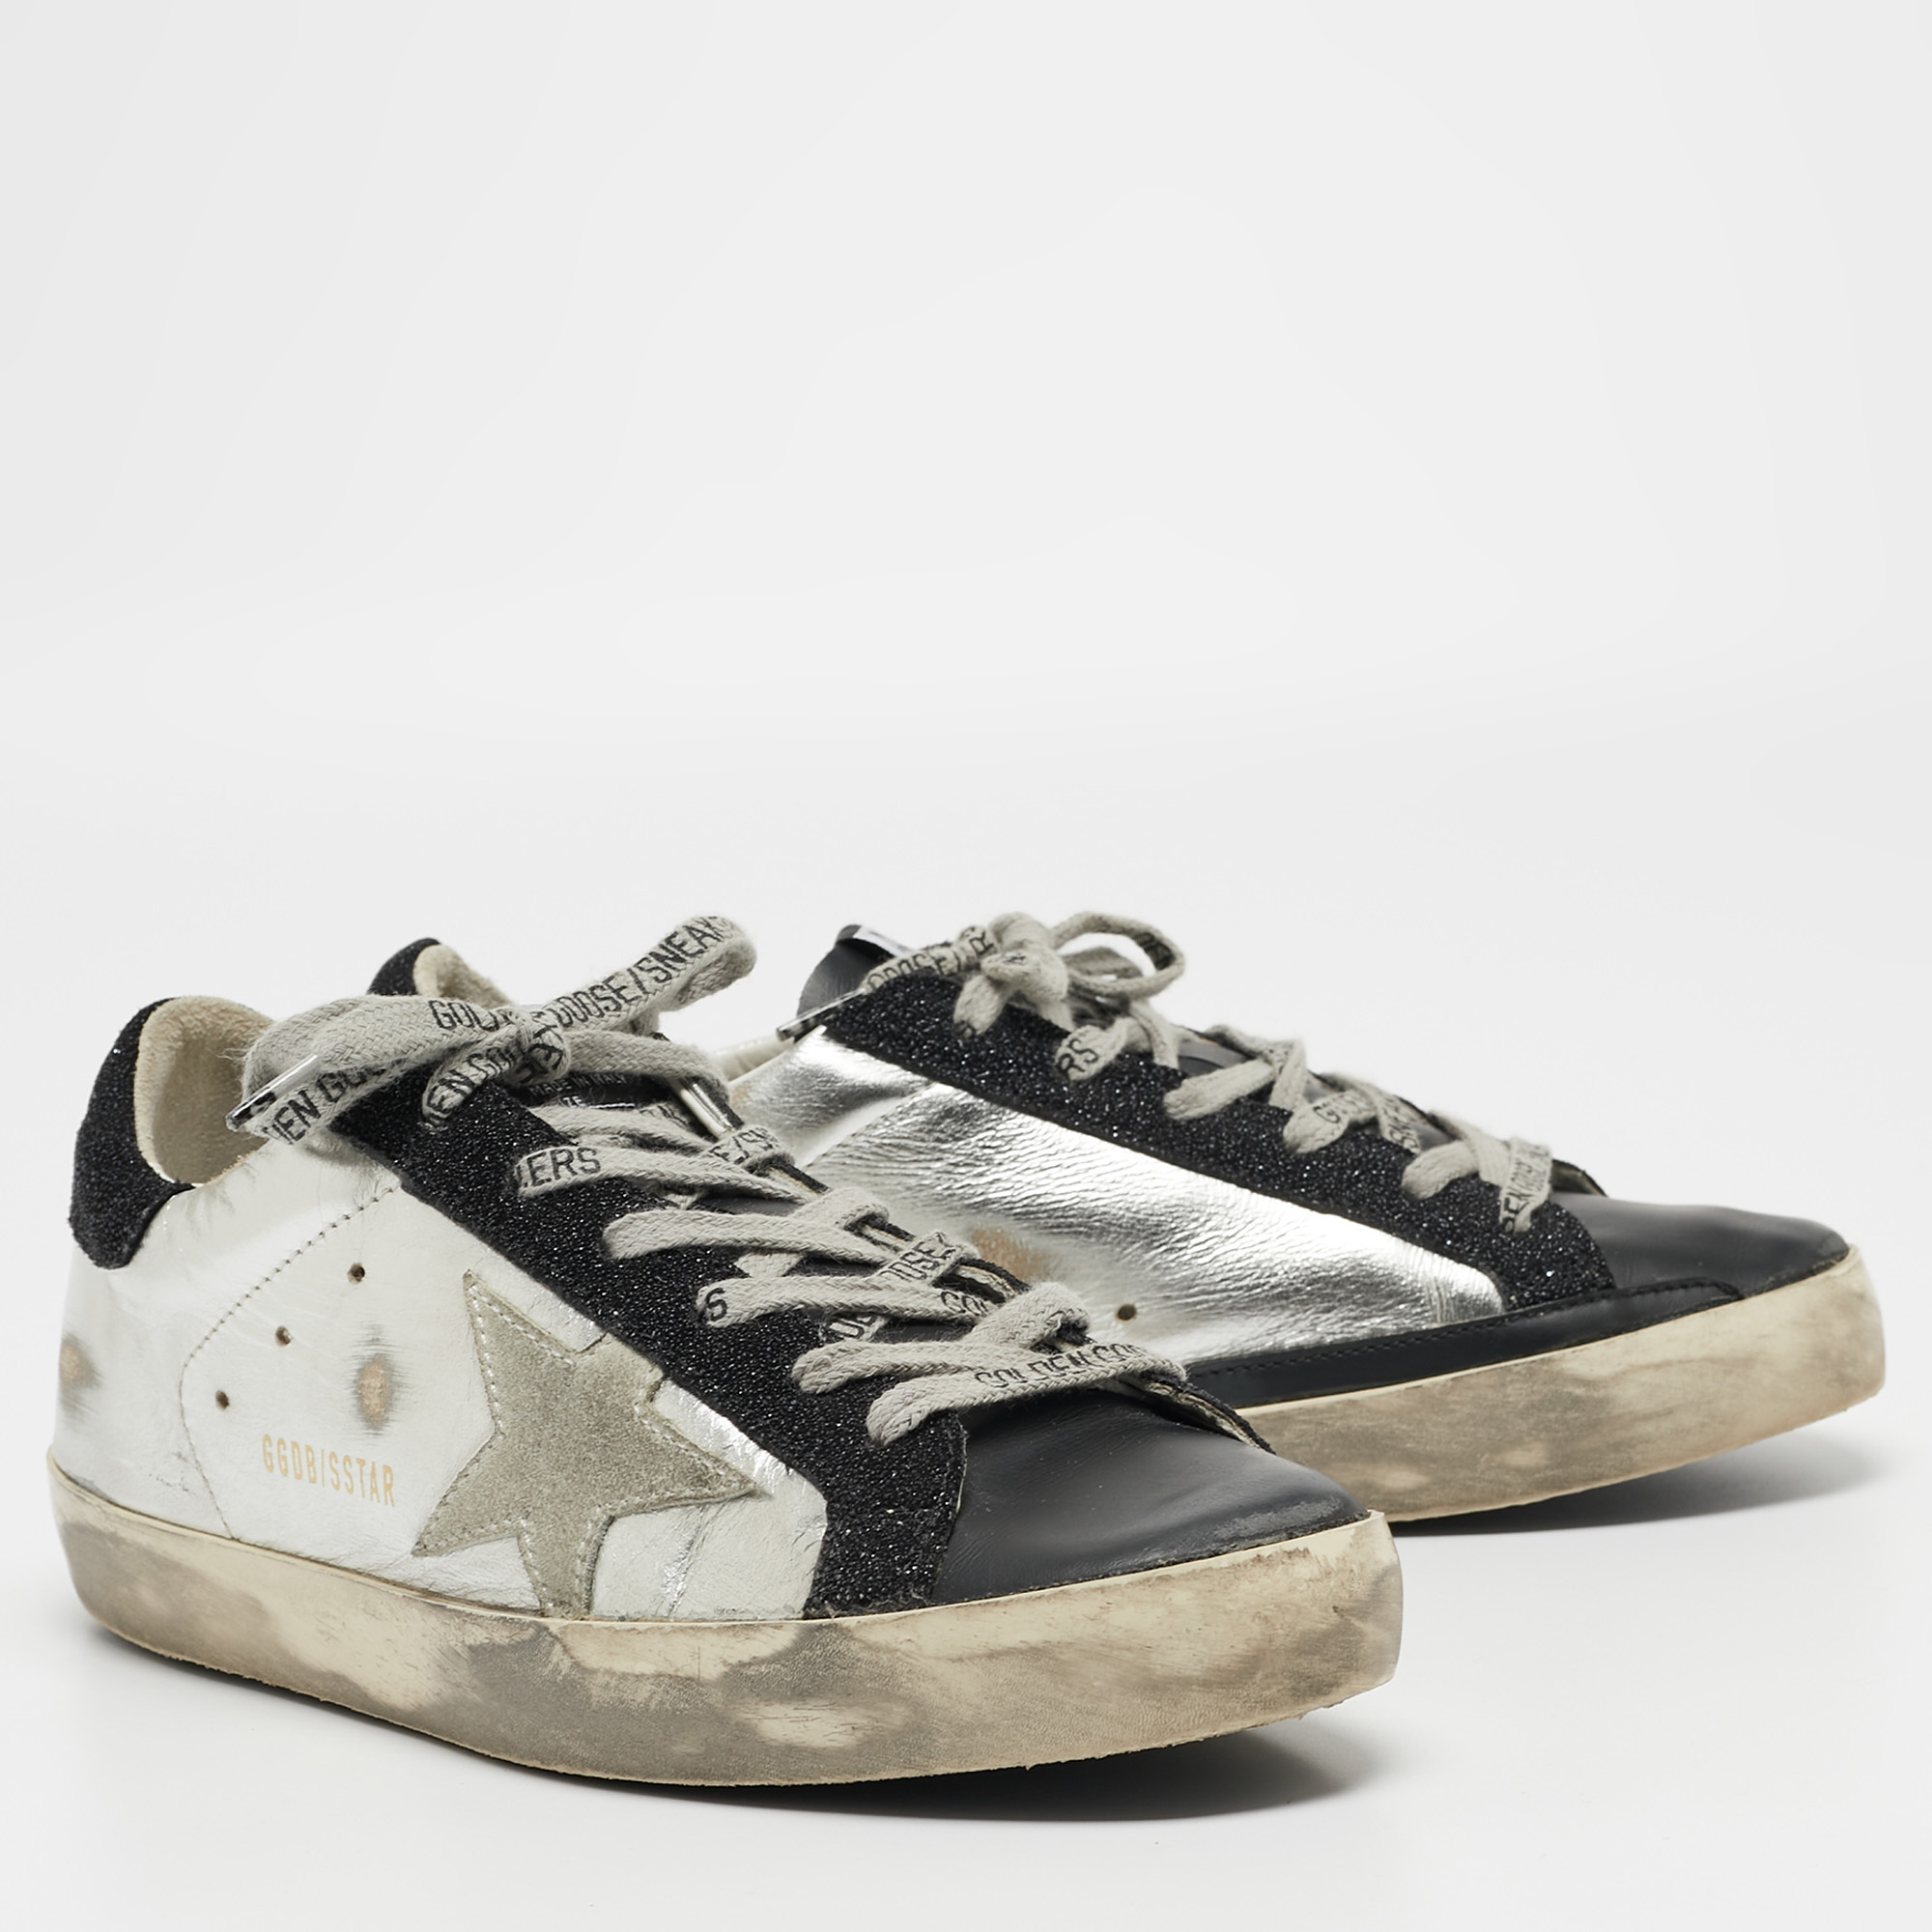 Golden Goose Silver/Black Leather Super-Star Sneakers Size 38